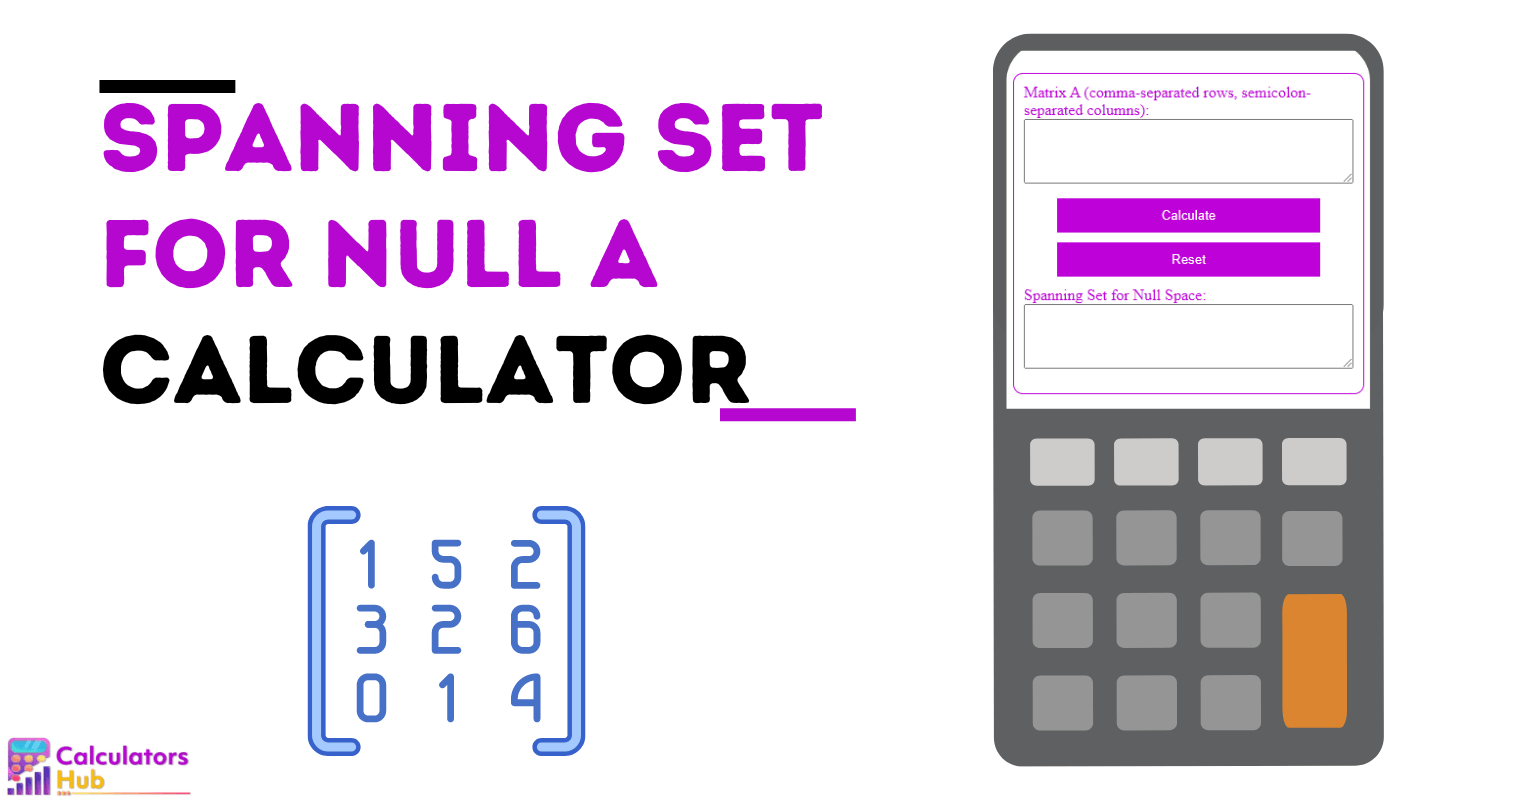 Spanning Set for Null A Calculator